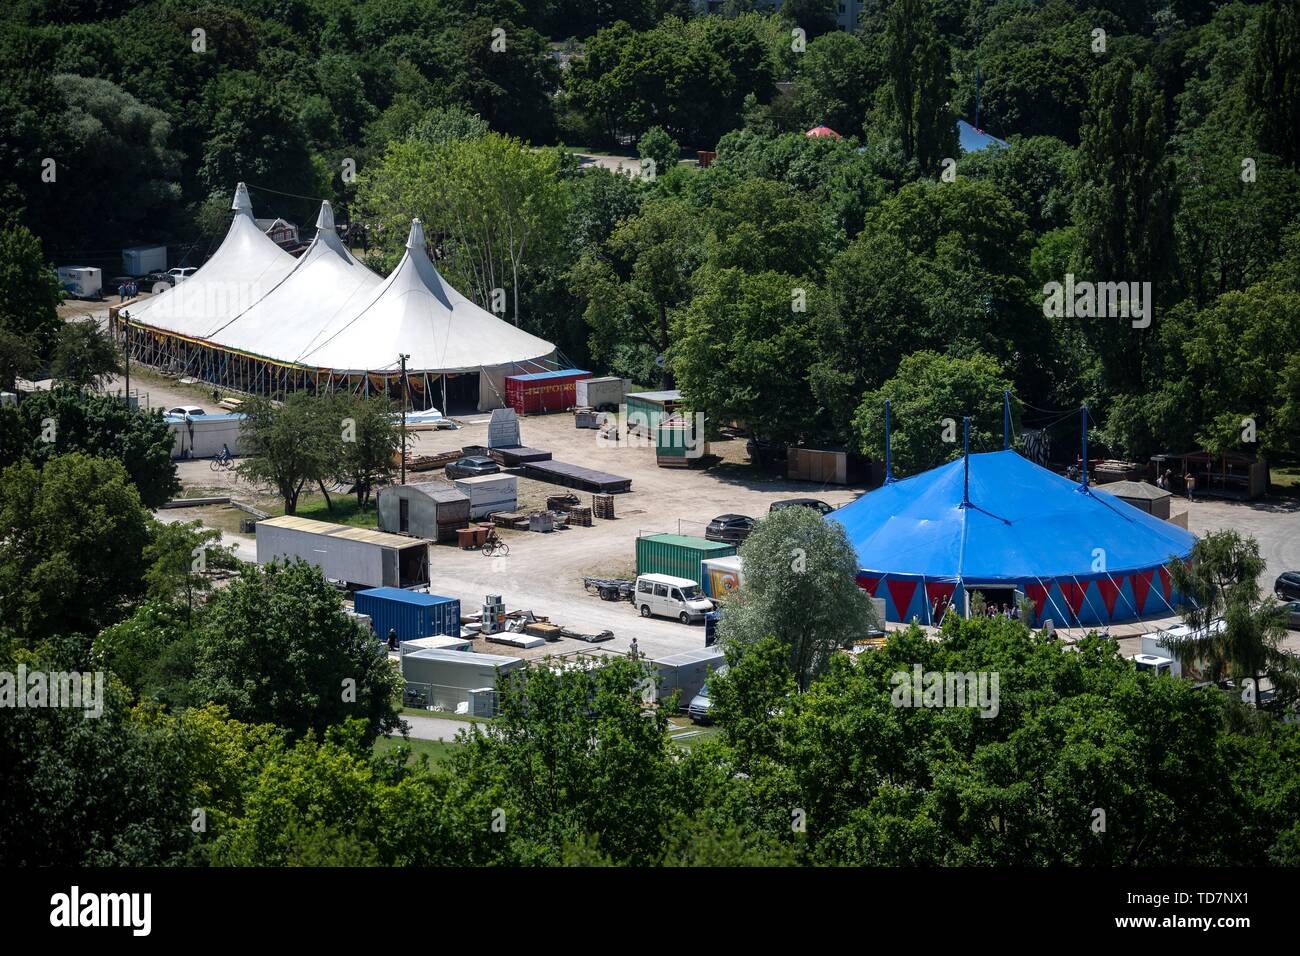 13 June 2019, Bavaria, Munich: Tents of the Tollwood Summer Festival 2019 will be erected in the Olympic Park South. The festival will take place from 26 June to 21 July 2019 under the motto 'Reicht leicht! Photo: Sina Schuldt/dpa Stock Photo